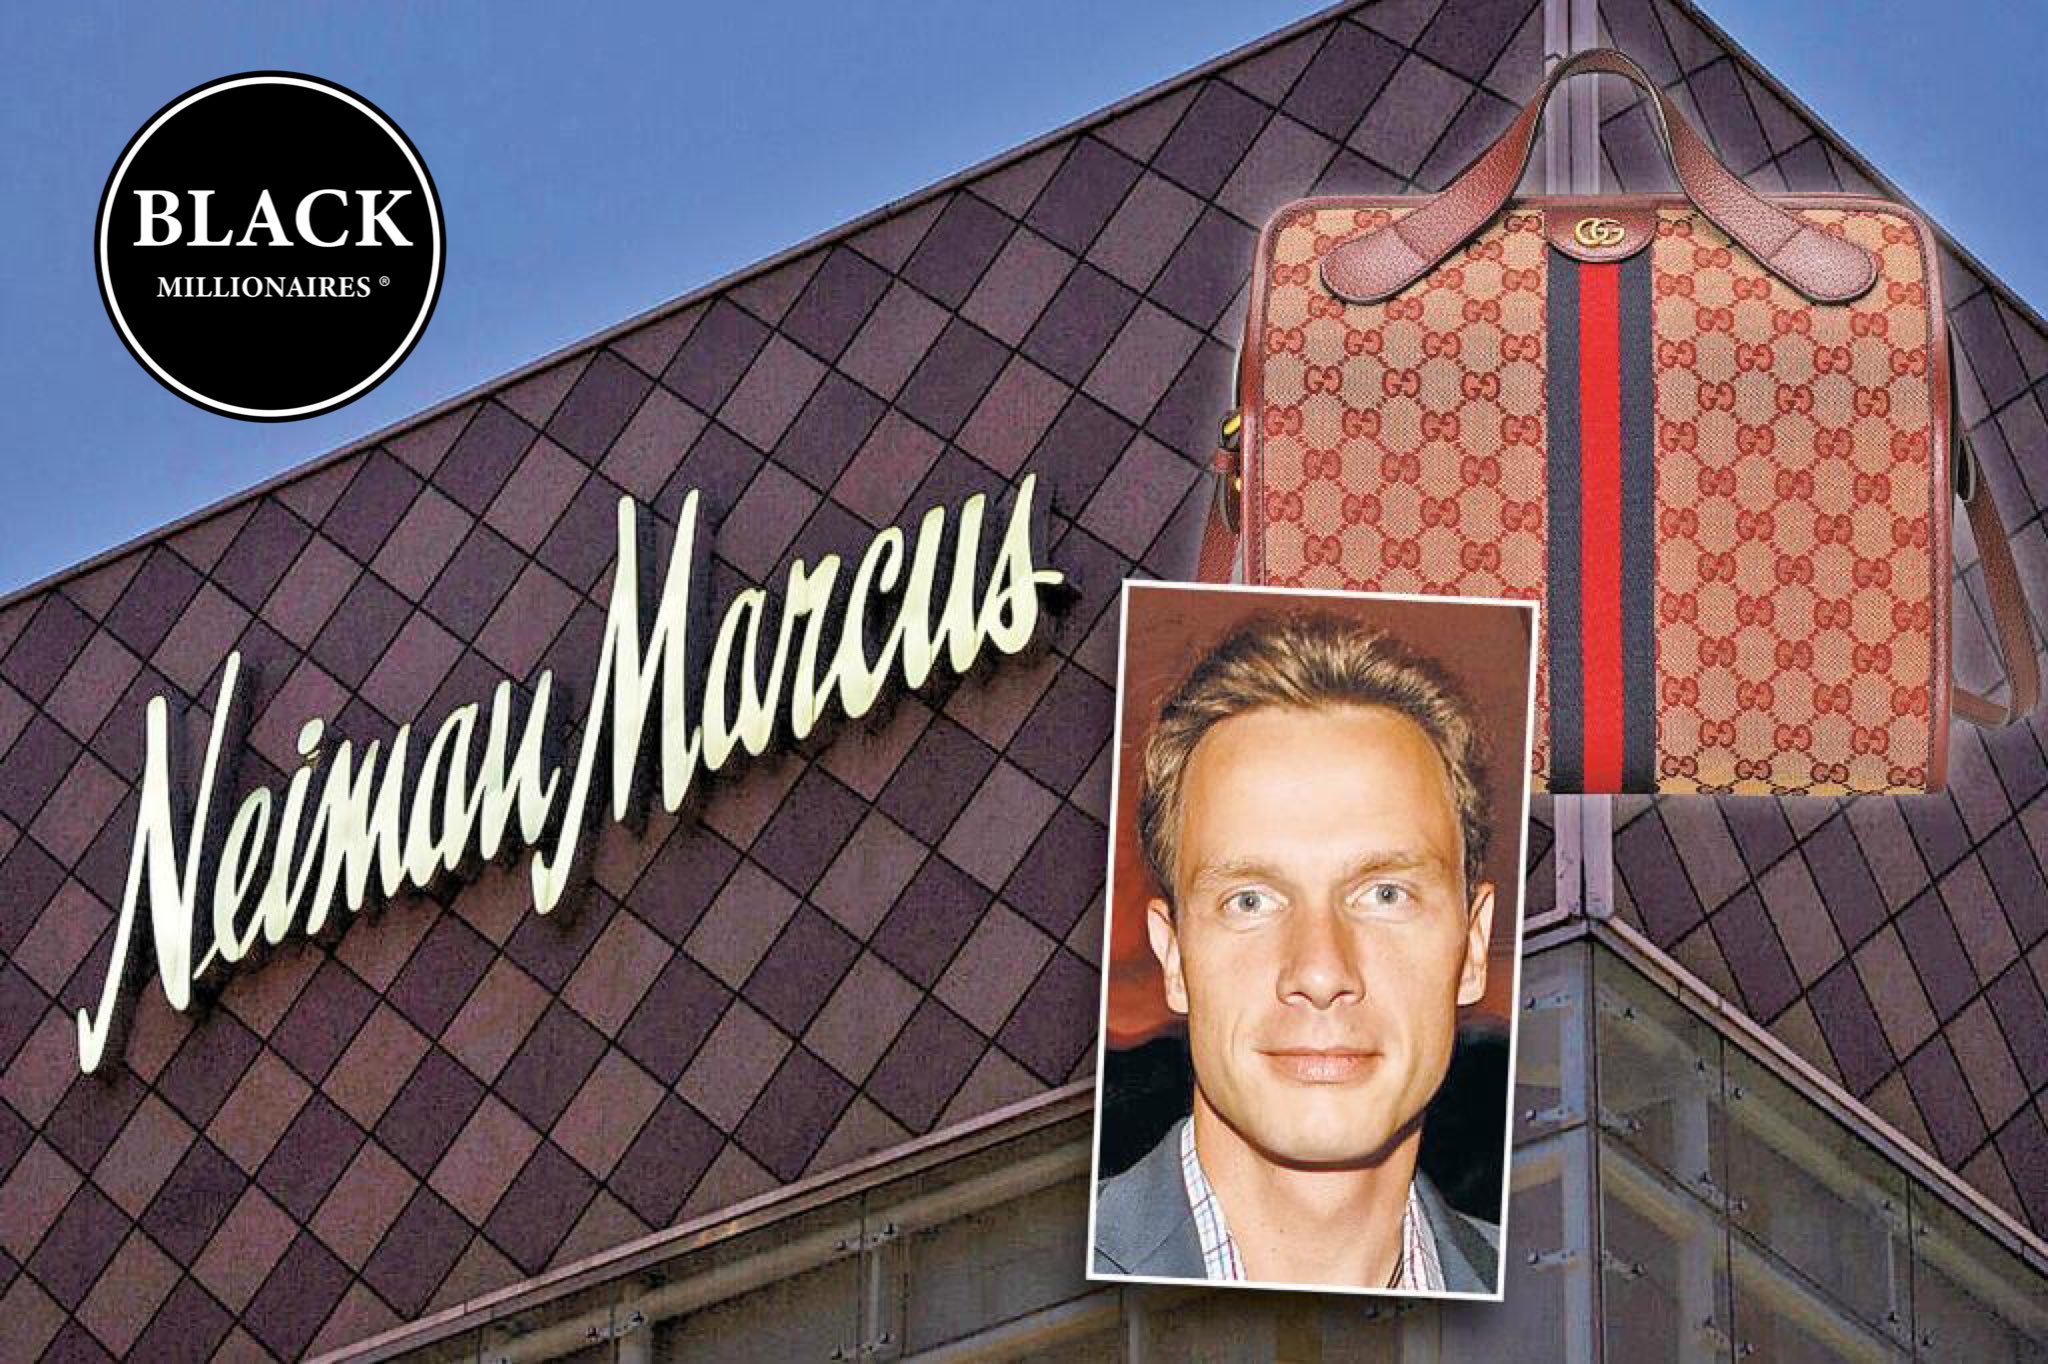 Black Millionaires ® on X: The luxury retail chain Neiman Marcus is  struggling with low sales & looking for a buyer just one year after its  CEO said he didn't want broke